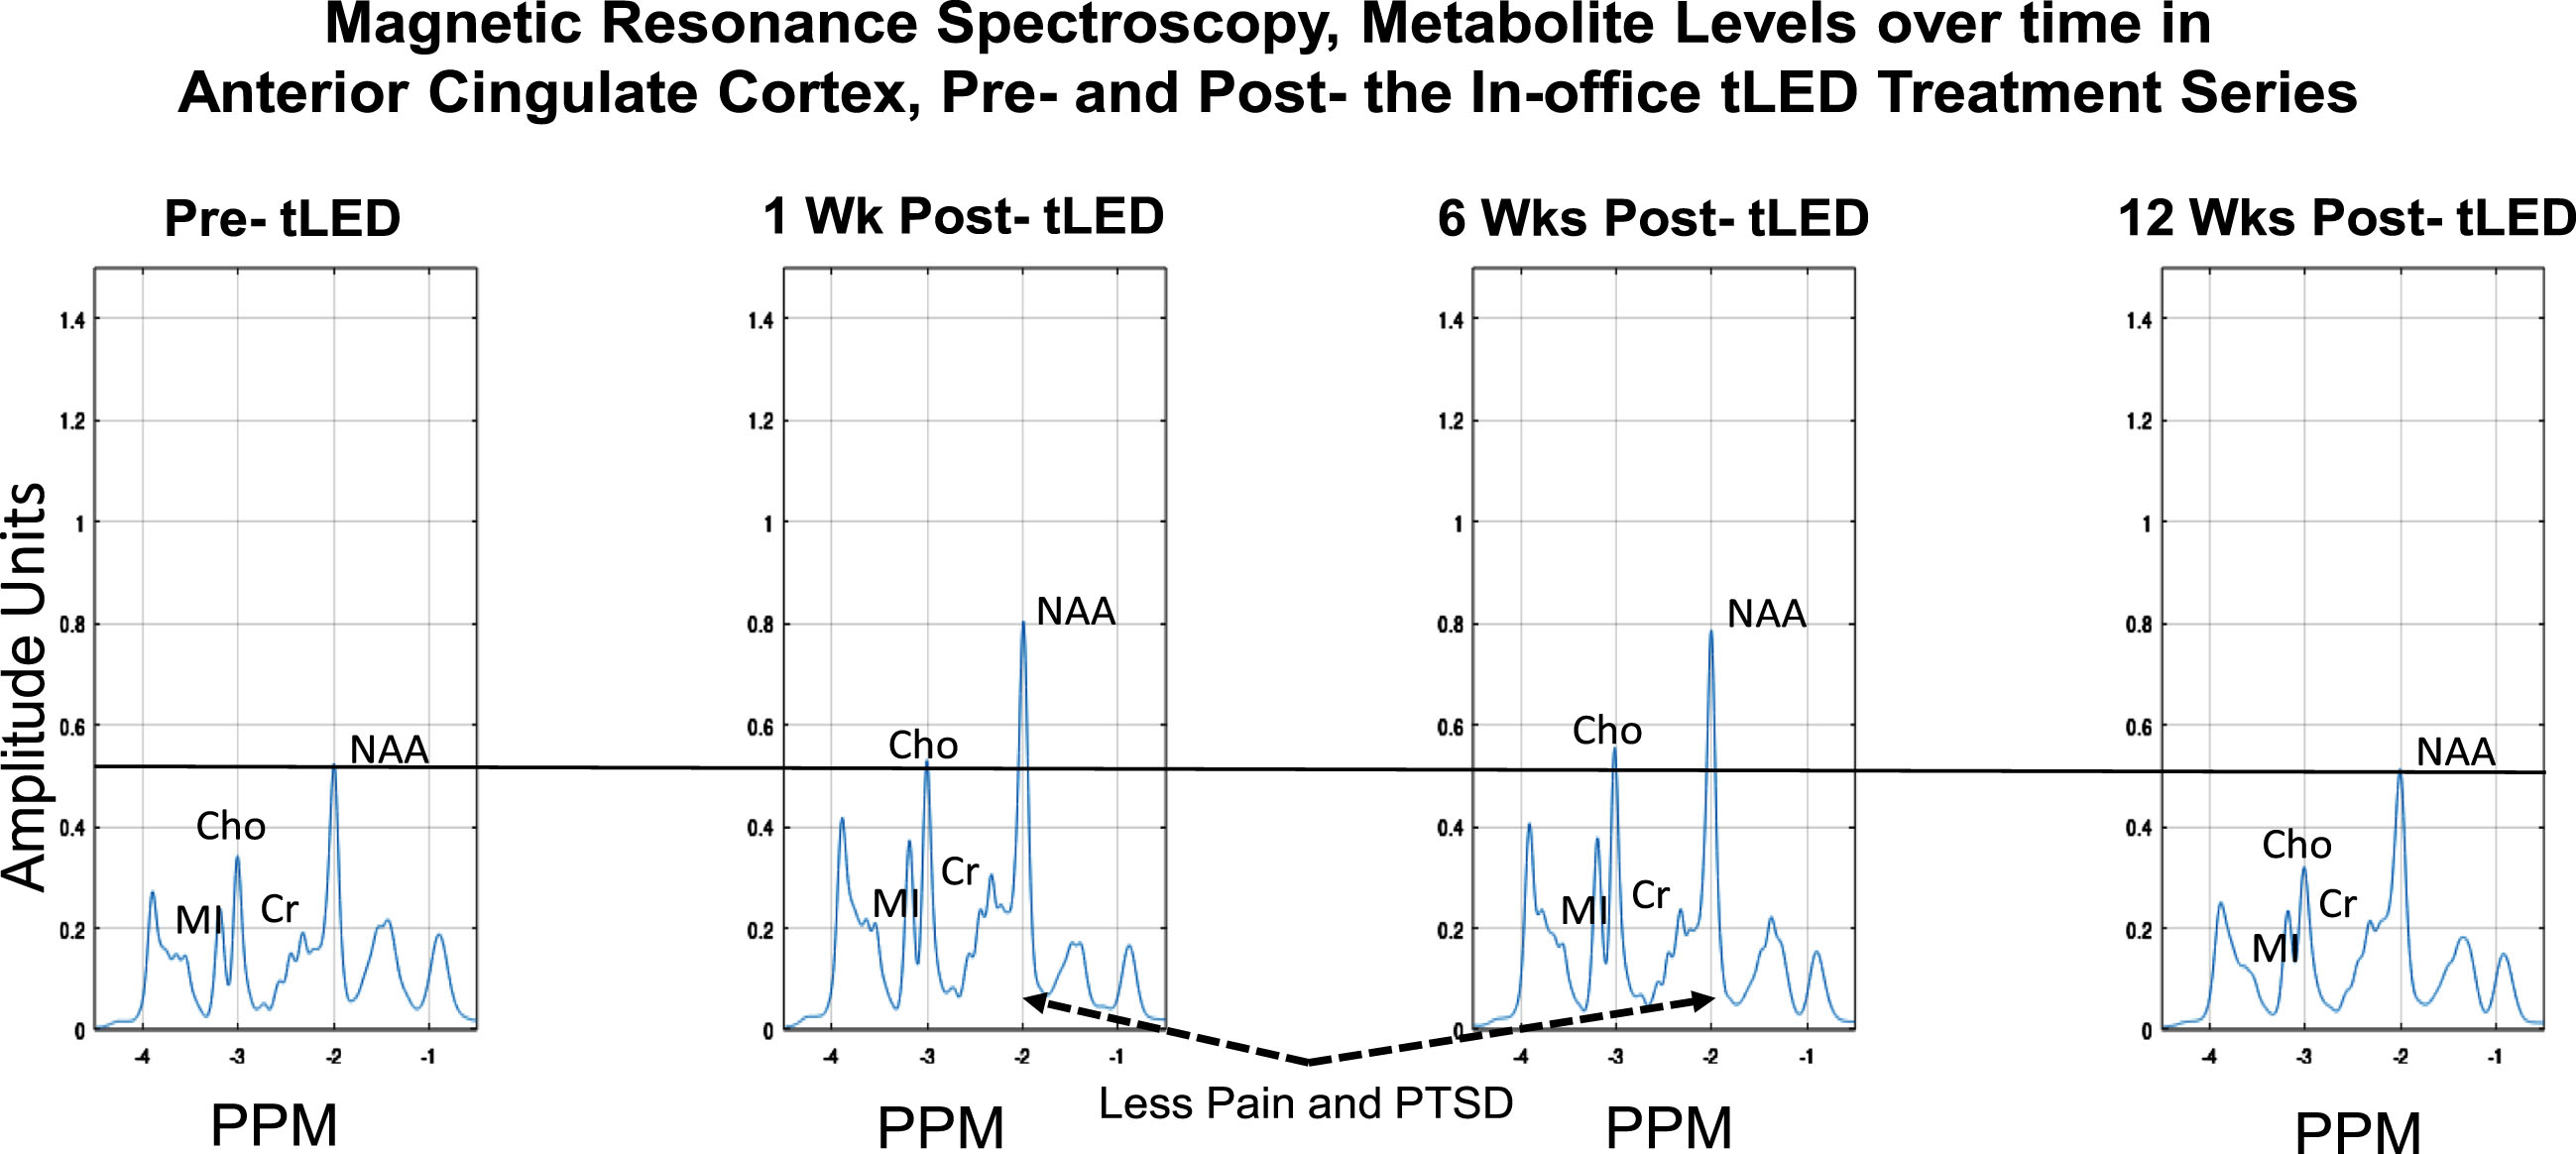 P2, MRS results for metabolite levels in anterior cingulate cortex over time, pre- /post- the initial, in-office tPBM series (Protocol C). Increased NAA (a correlate of oxygen consumption in mitochondria) was present at 1 week and 6 weeks after the in-office tPBM series, but not at 12 weeks, when NAA returned to pre-treatment level. P2 had rated less pain and PTSD at 1 week and 6 weeks; however, these self-ratings returned towards, or at pre-, at 12 weeks (Fig. 3B, graphs a and c). The PTSD and pain ratings again improved after the at-home tLED series. No MRS data are available then, due to COVID restrictions. MRS, magnetic resonance spectroscopy; NAA, n-acetyl-aspartate; MI, myo-inositol; Cho, choline; Cr, creatine; PPM, parts per million; PTSD, post-traumatic stress disorder.